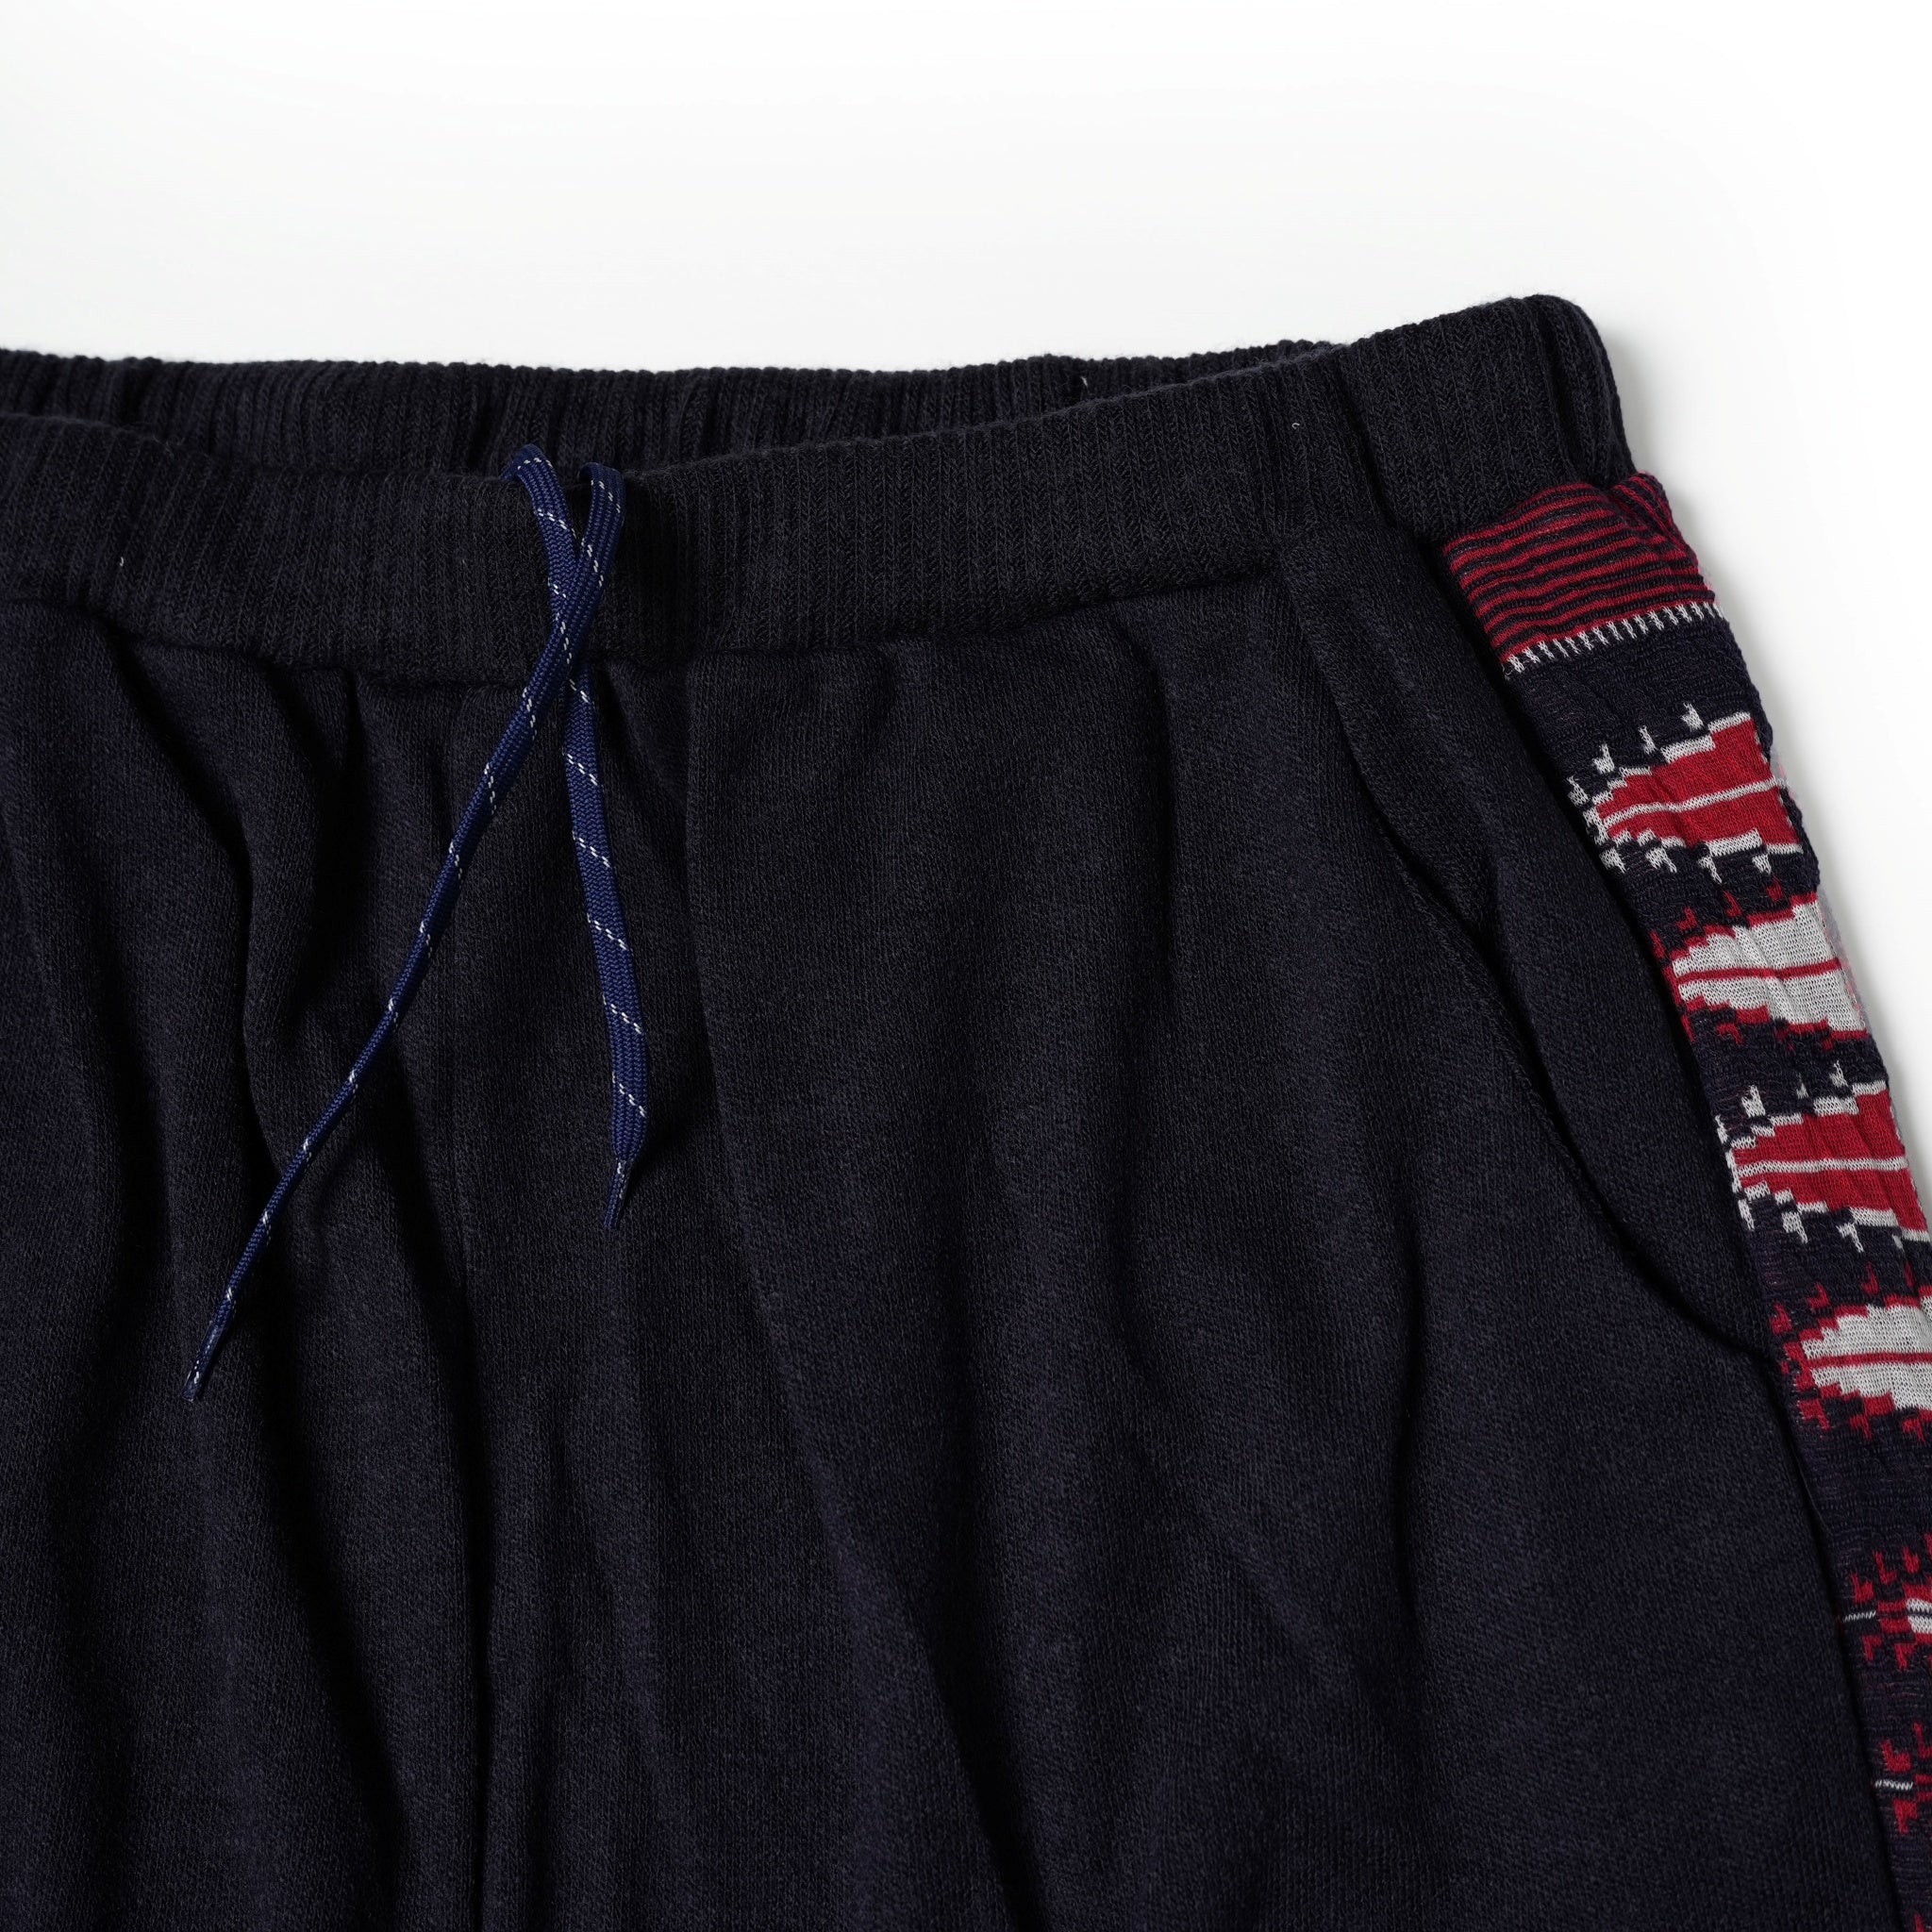 No:SF23AW-23 | Name:Jaquard Relax Pants | Color:Navy【STOF_ストフ】